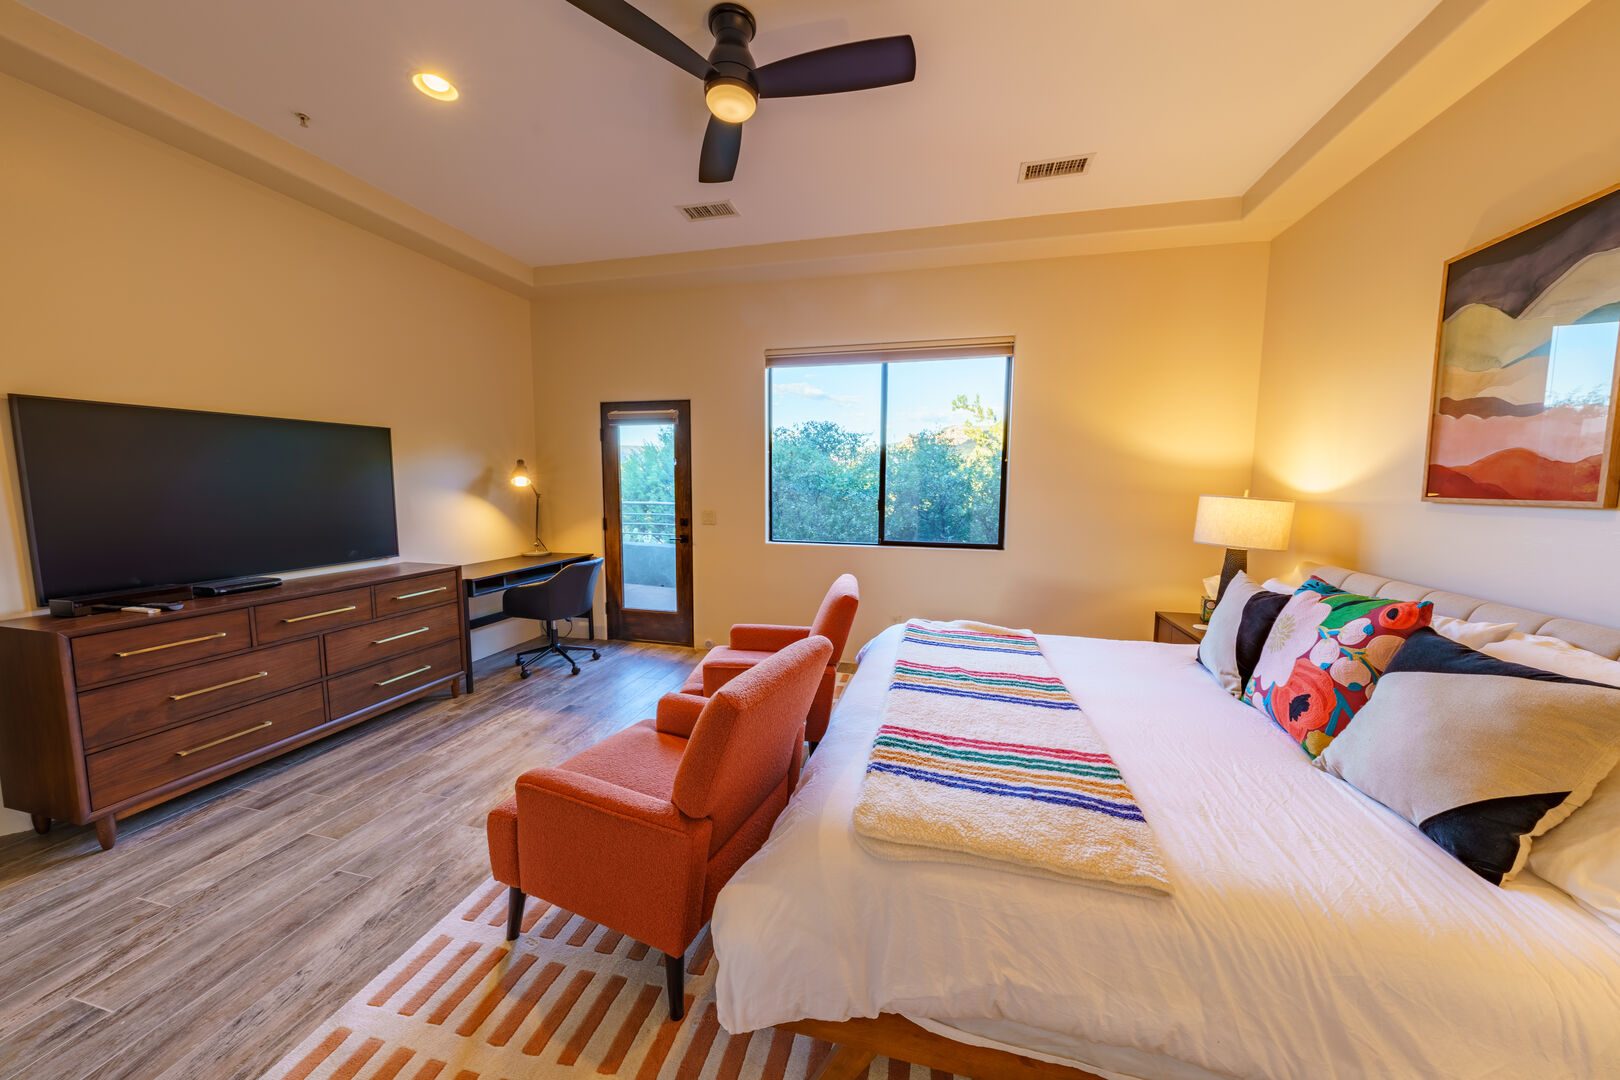 Master Bedroom Includes Smart TV And Access To Backyard